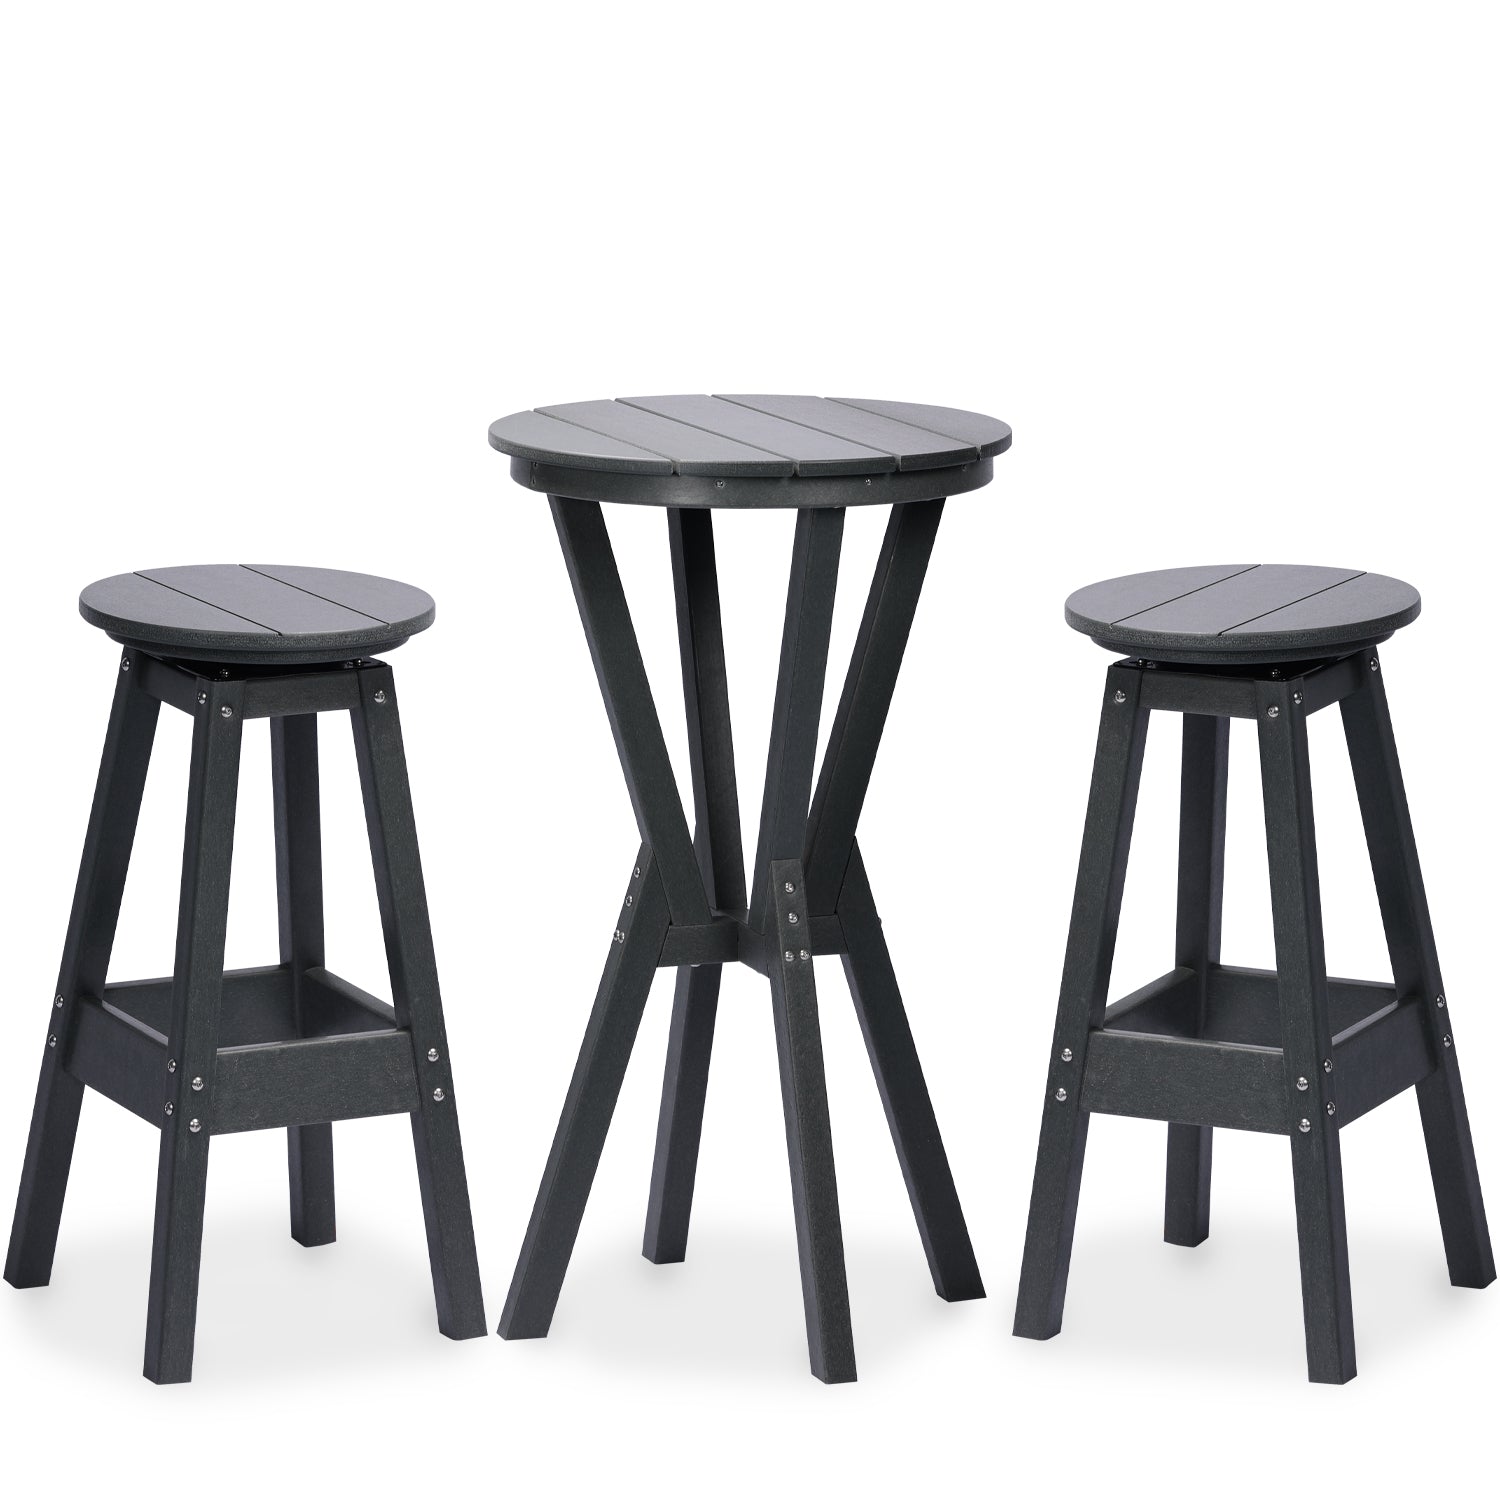 3-Piece Bar Table and Stools Set with Swivel Seat - Aoodor